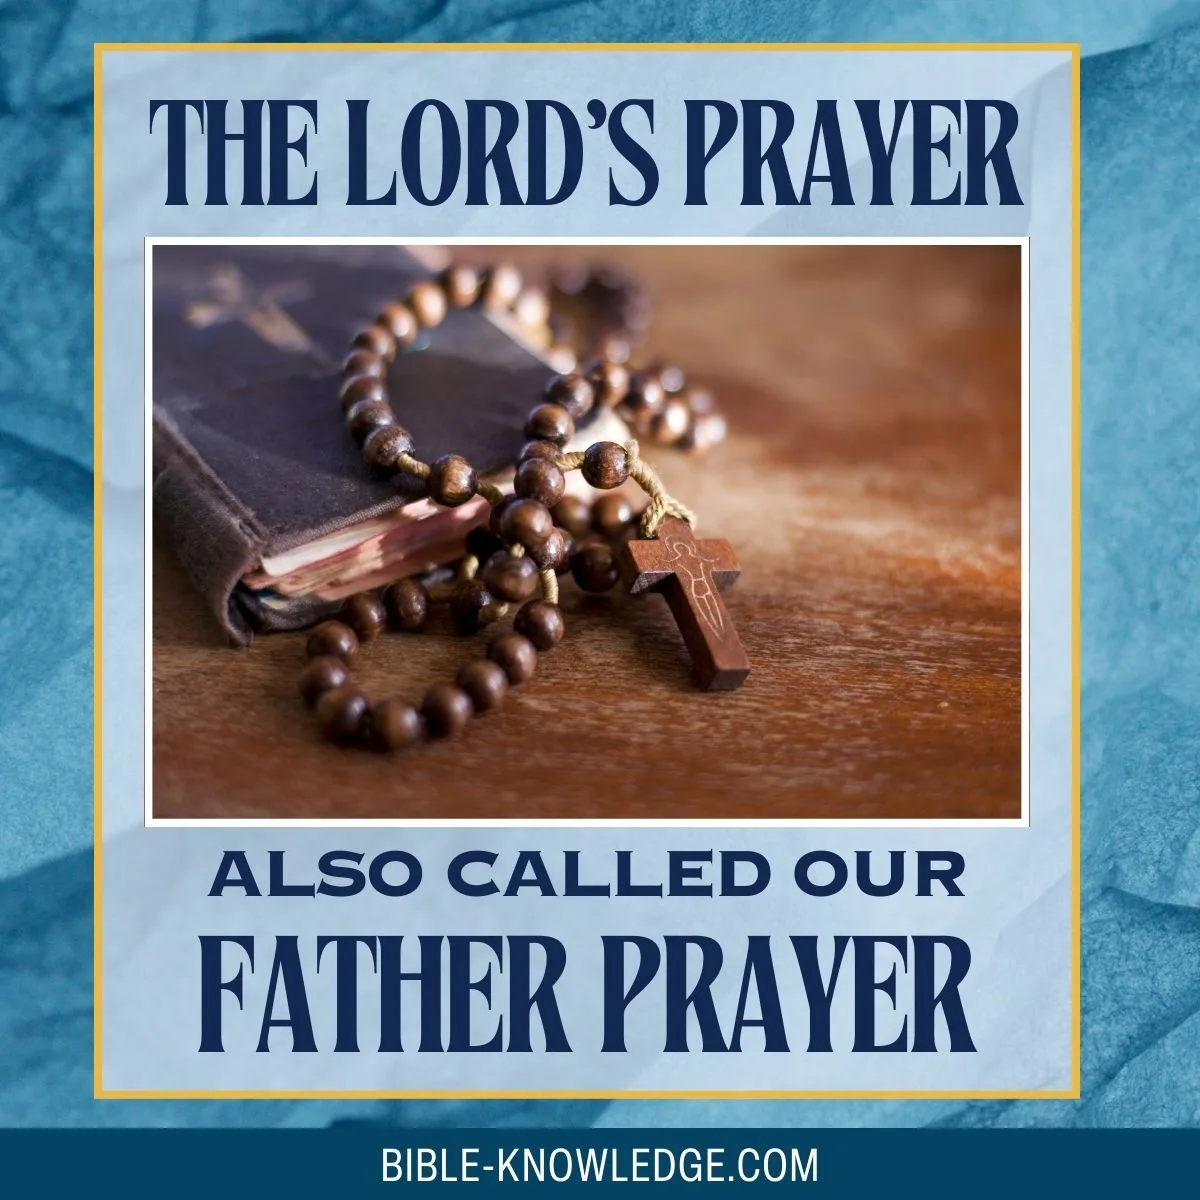 Day 25 of 33: The Rosary, our favorite prayer